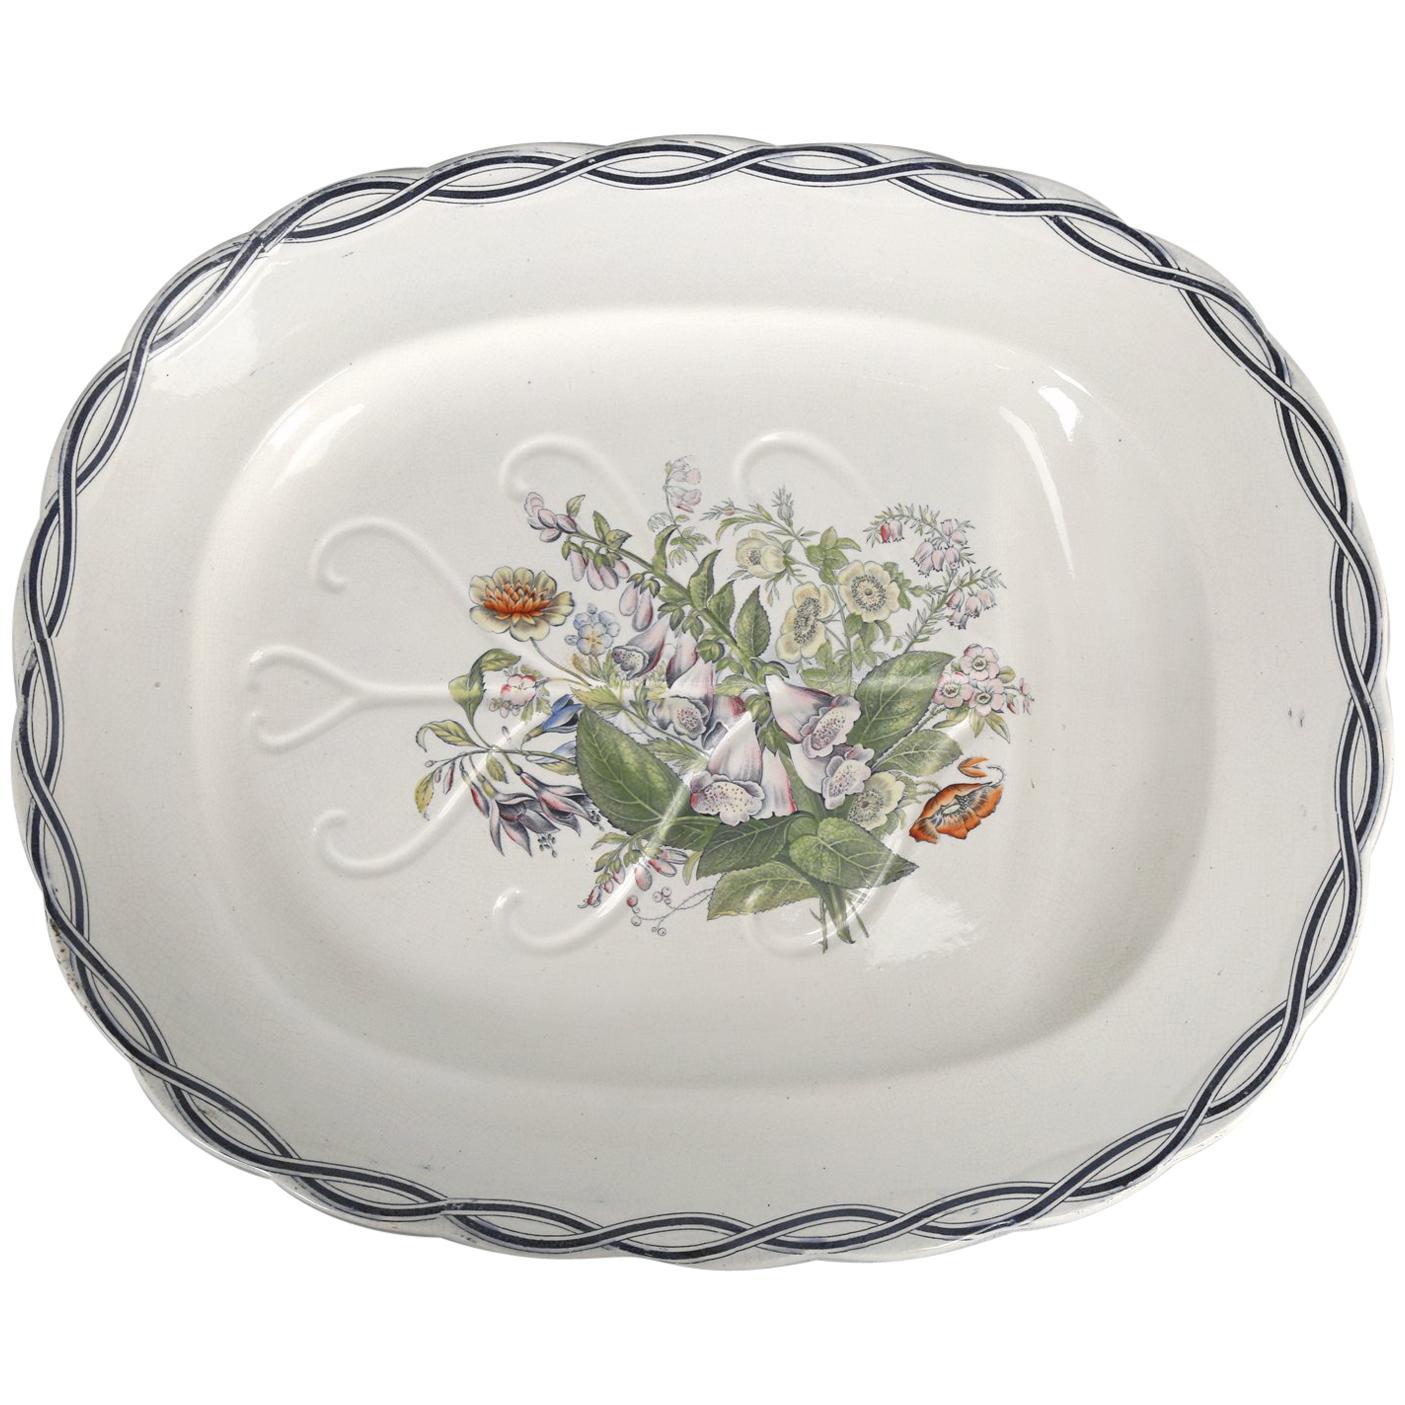 Meigh Very Large Turkey Platter, circa 1851-1861  For Sale